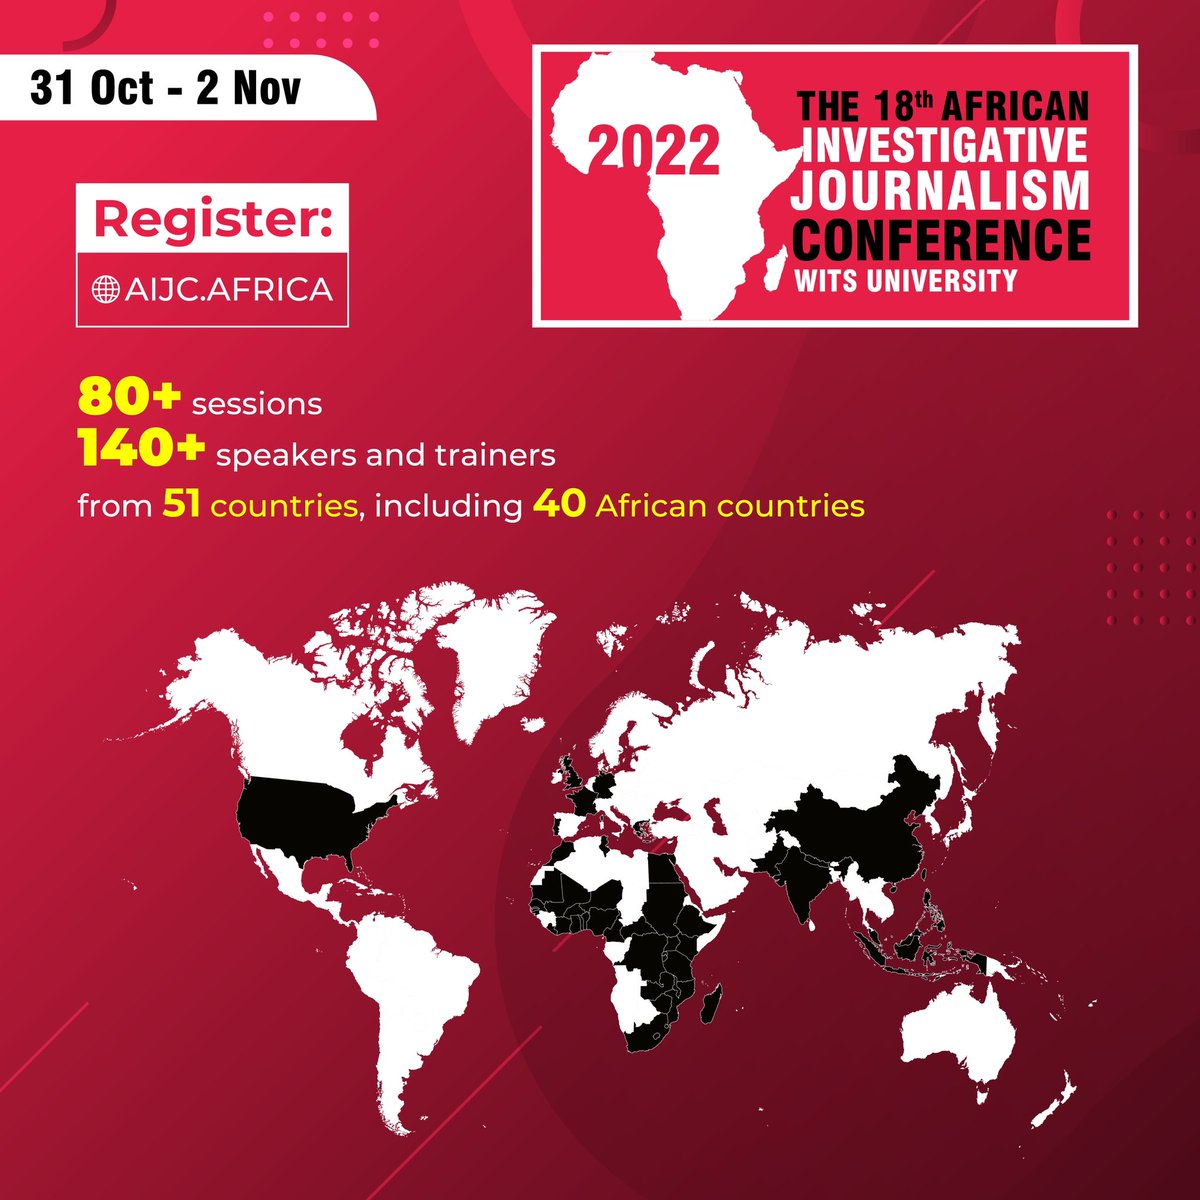 REGISTER: There's still time to register for the 18th @AIJC_Conference, taking place in Jo'burg next week. With 80+ sessions and 140+ speakers and trainers from 51 countries, you don't want to miss out on one of the best journalistic events in the world! aijc.africa/programme/